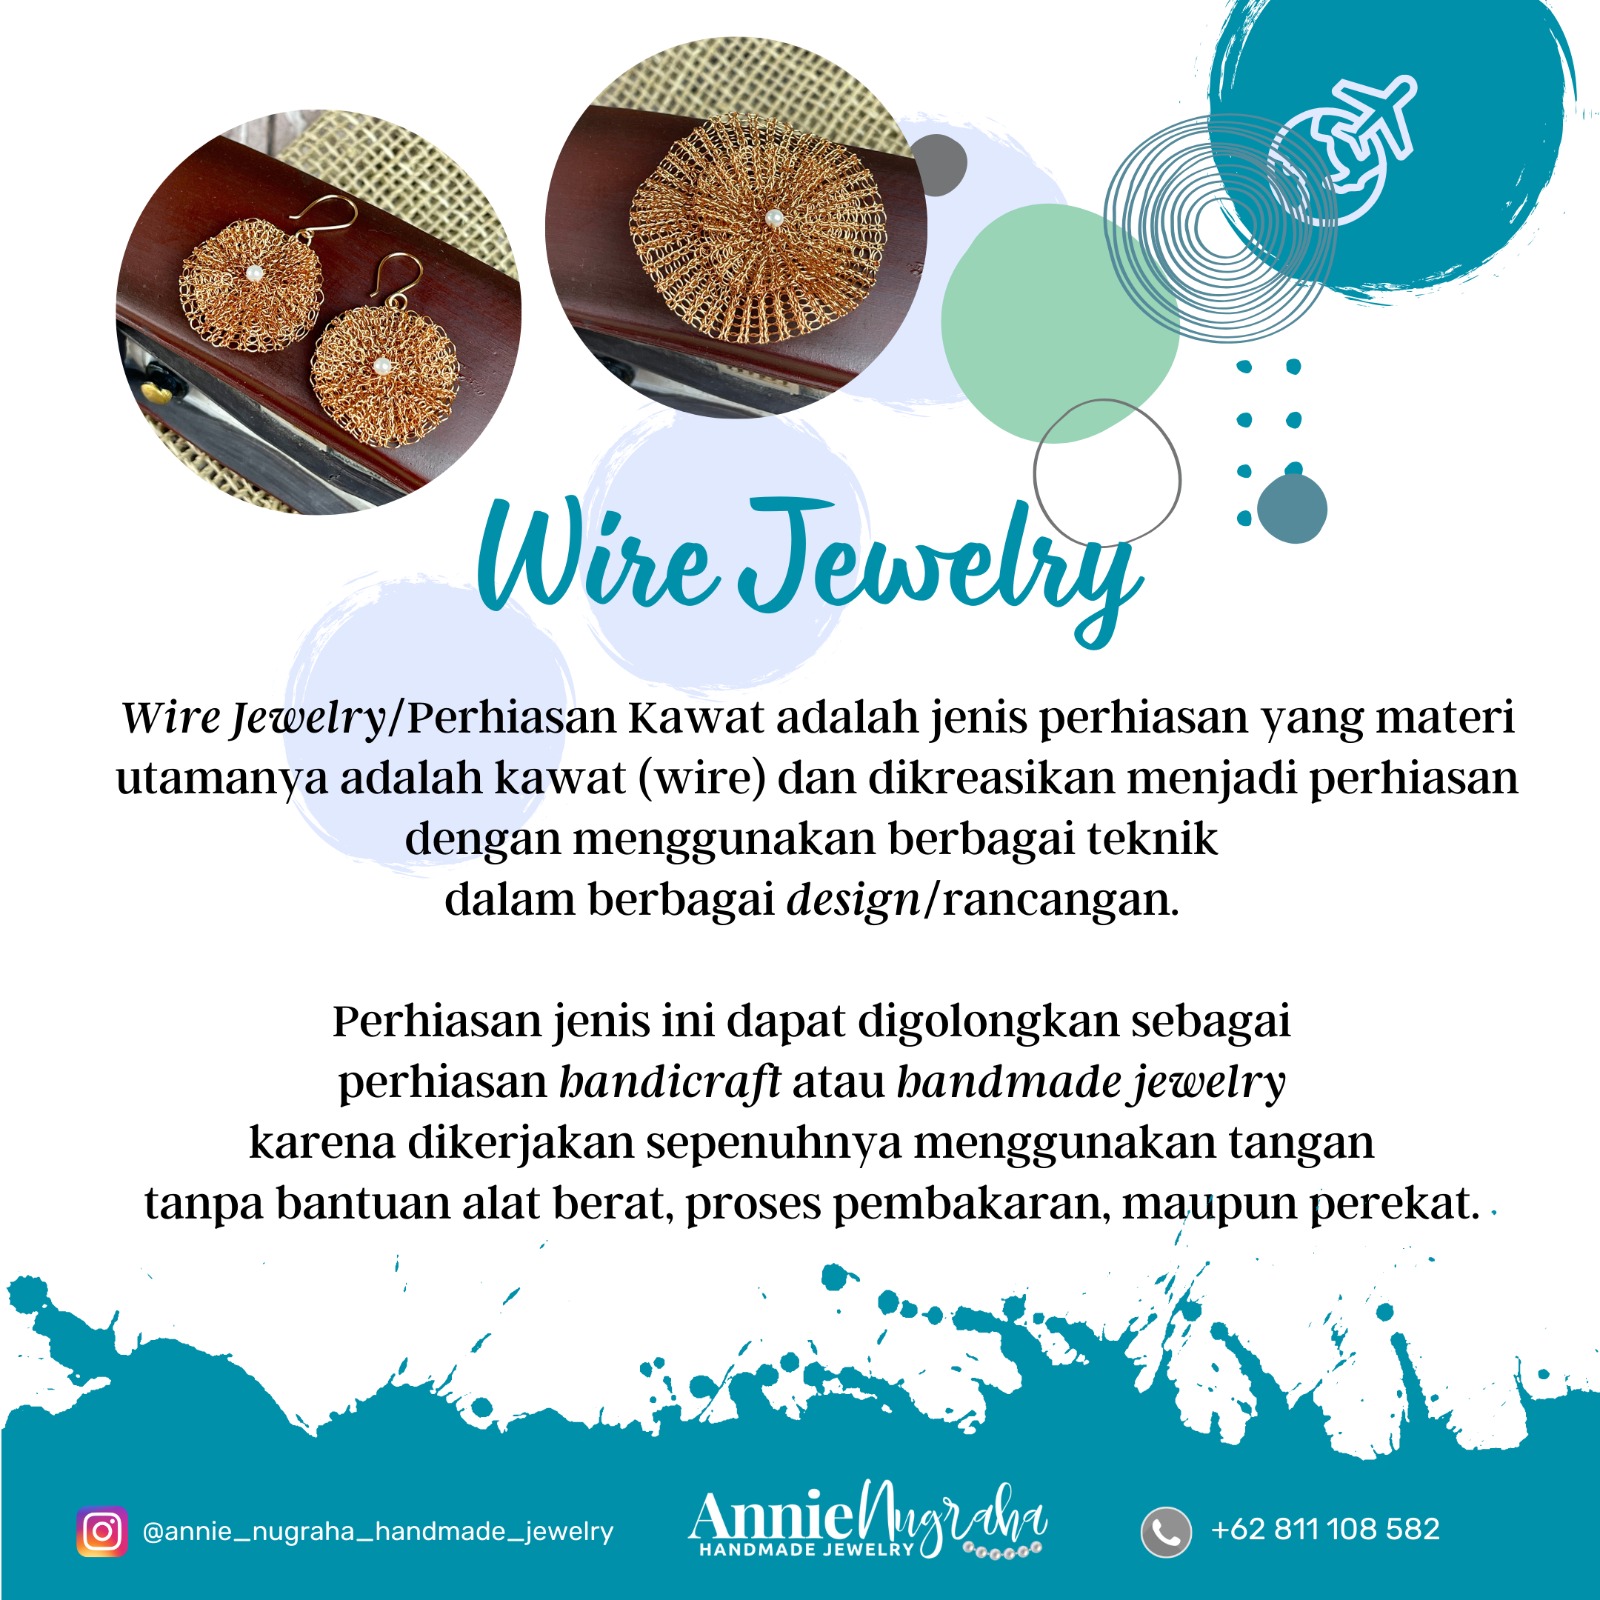 Wire Jewelry Workshop for Corporate